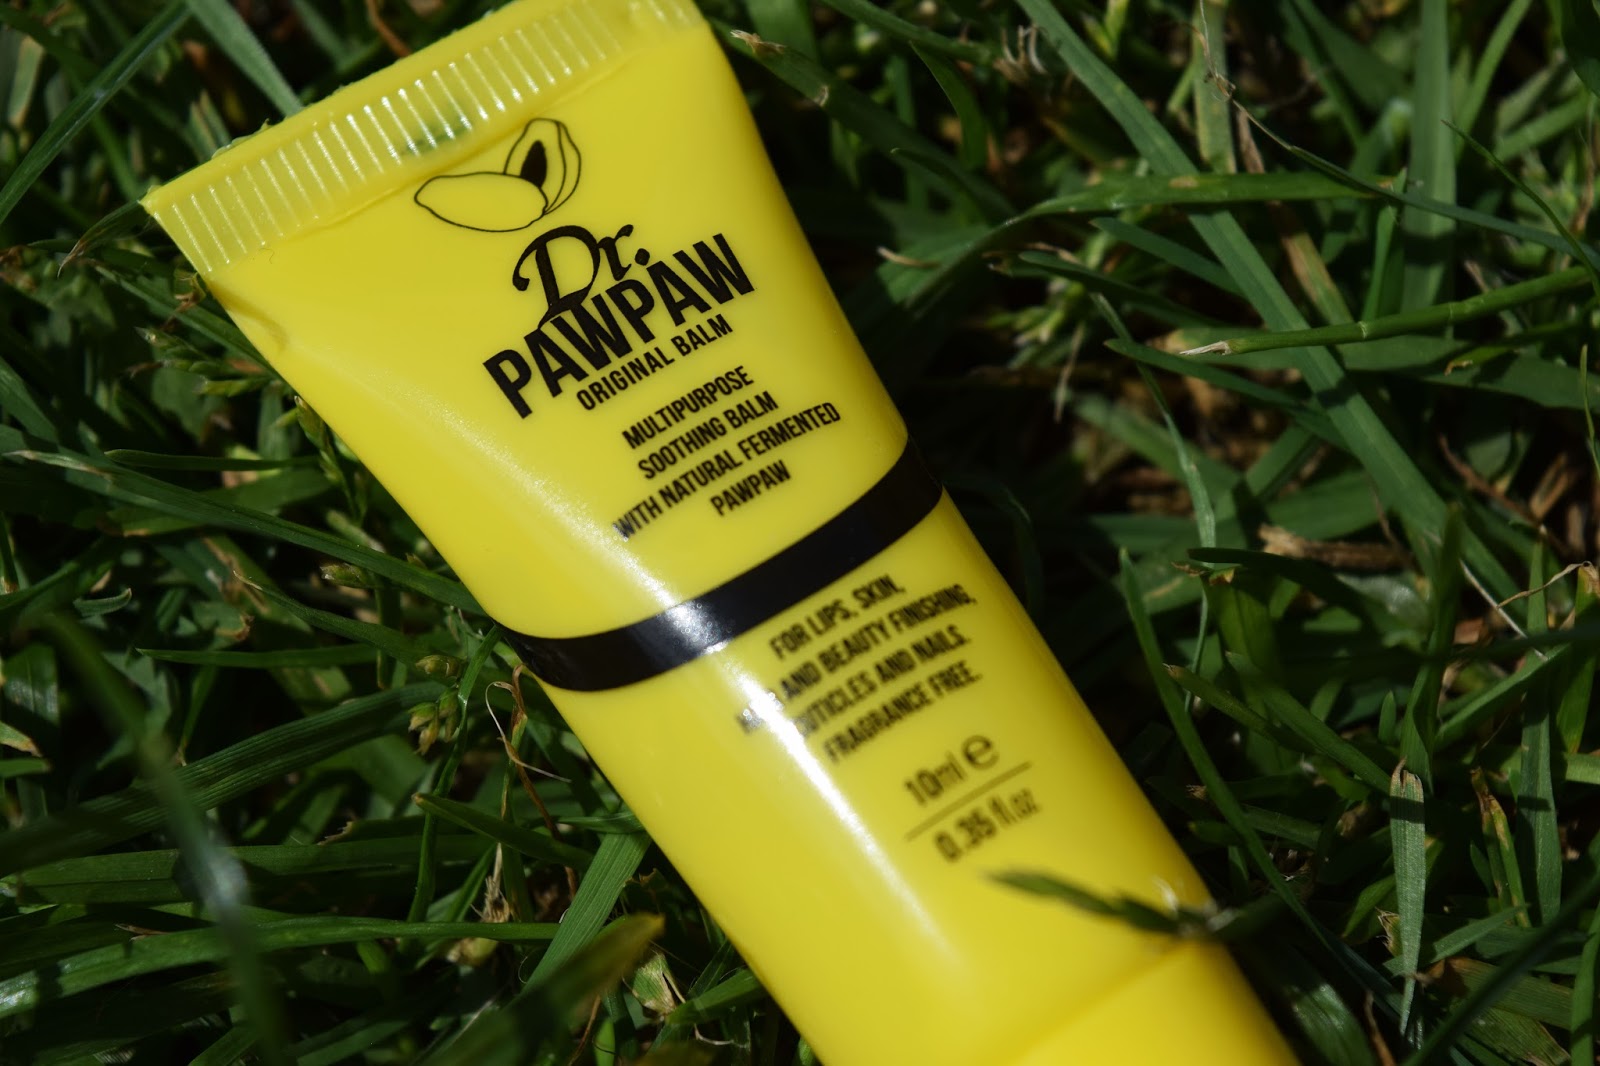 a close up shot of the text on the tube of DR PawPaw lipbalm